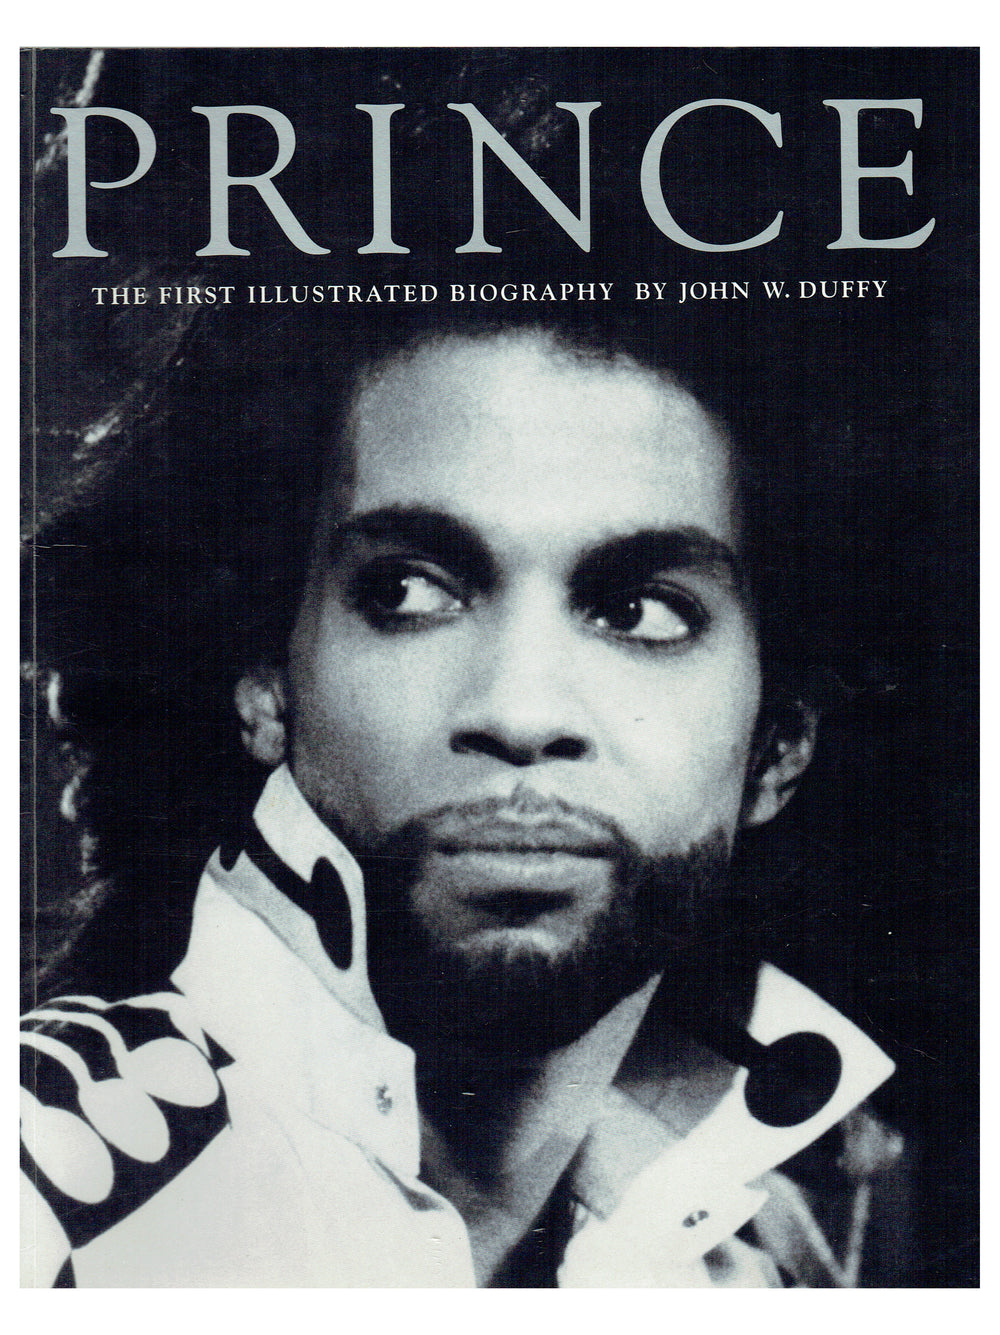 Prince Illustrated Biography Paperback Softback Book 110 Pages John W Duffy SMS